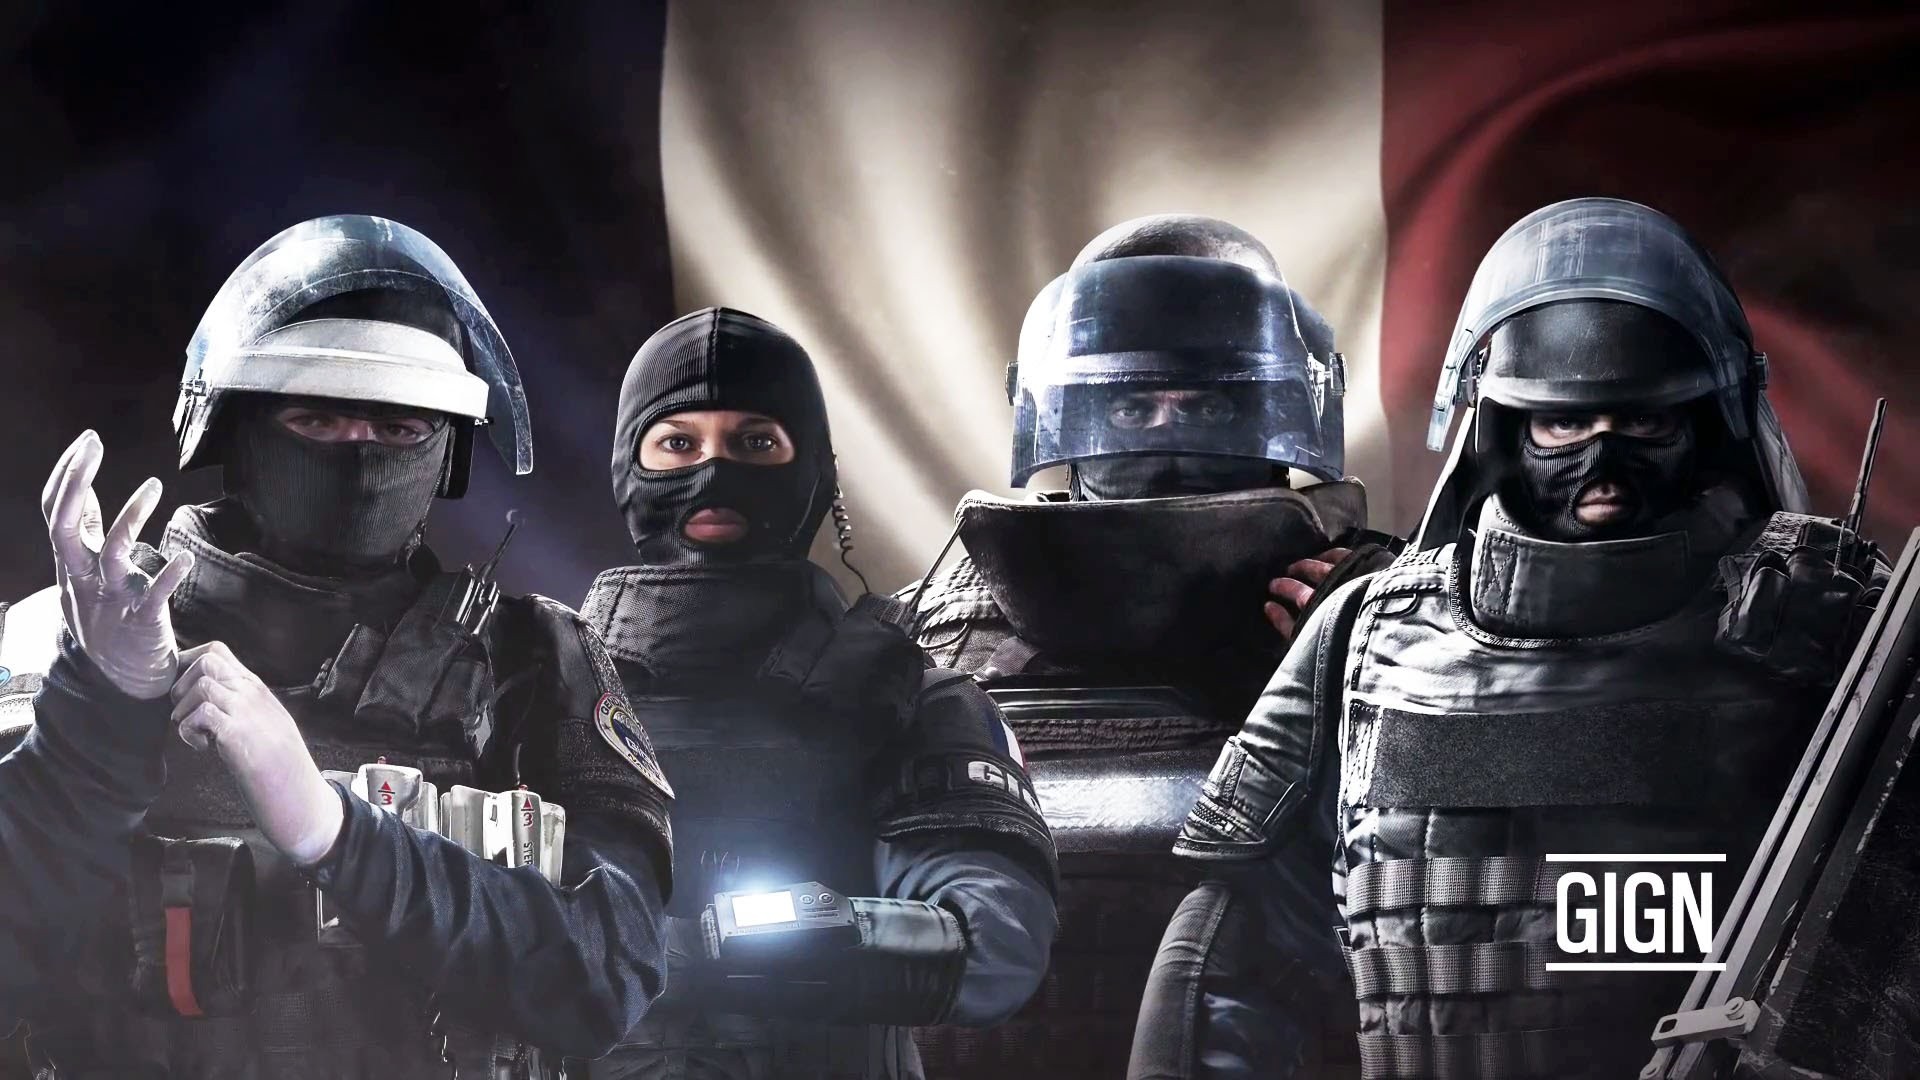 Rainbow Six Siege Tom Clancys Ubisoft Video Games GiGN Special Forces 1920x1080